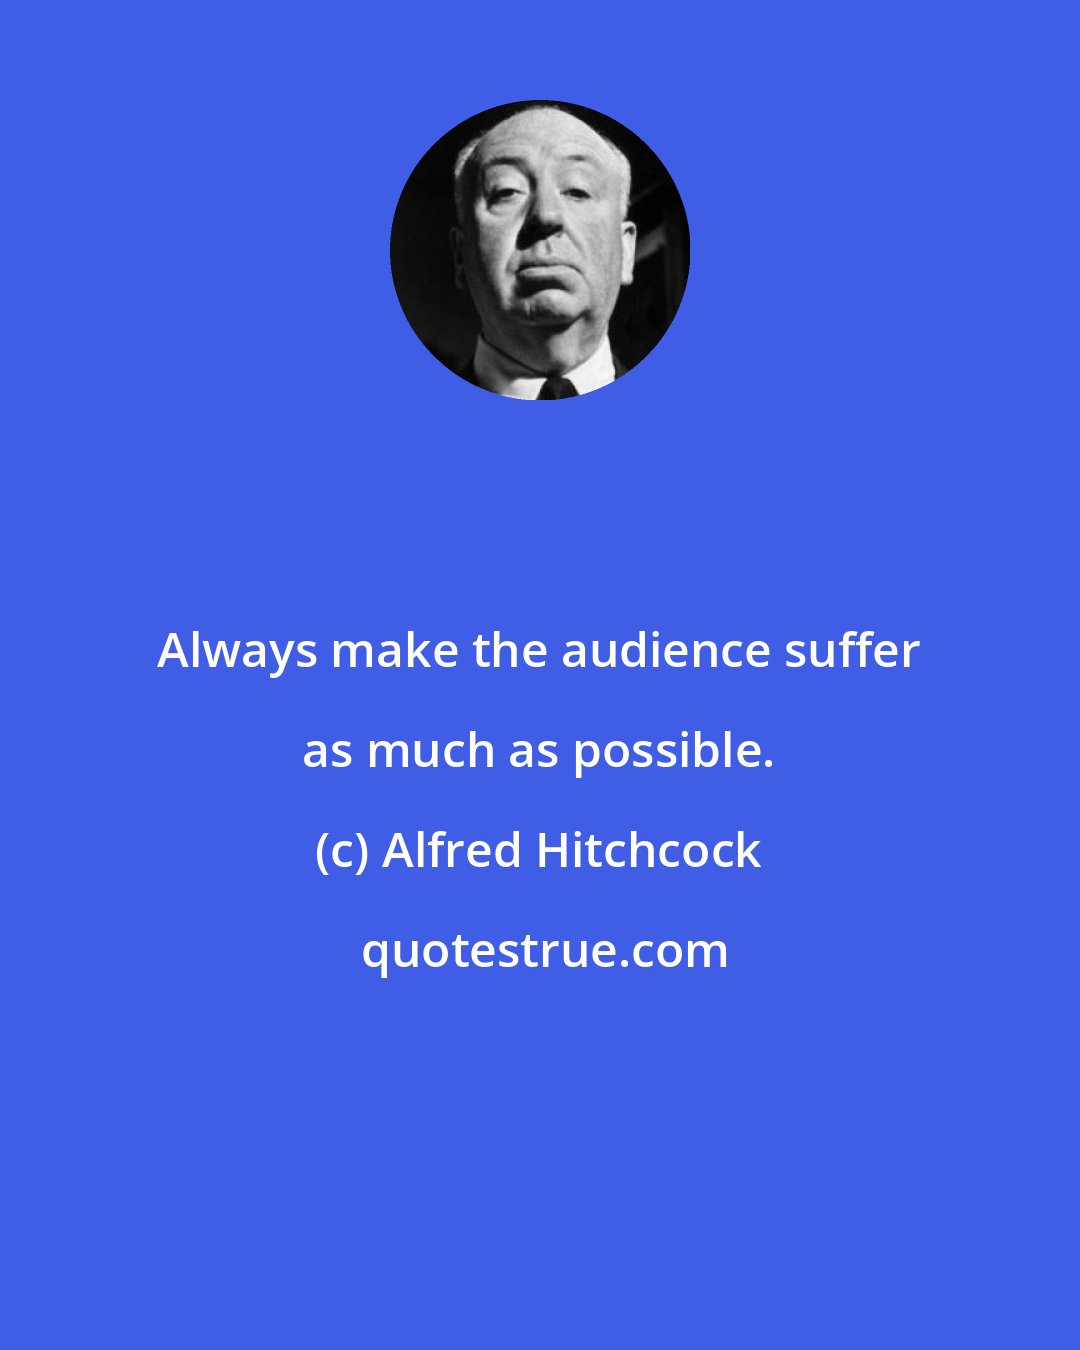 Alfred Hitchcock: Always make the audience suffer as much as possible.